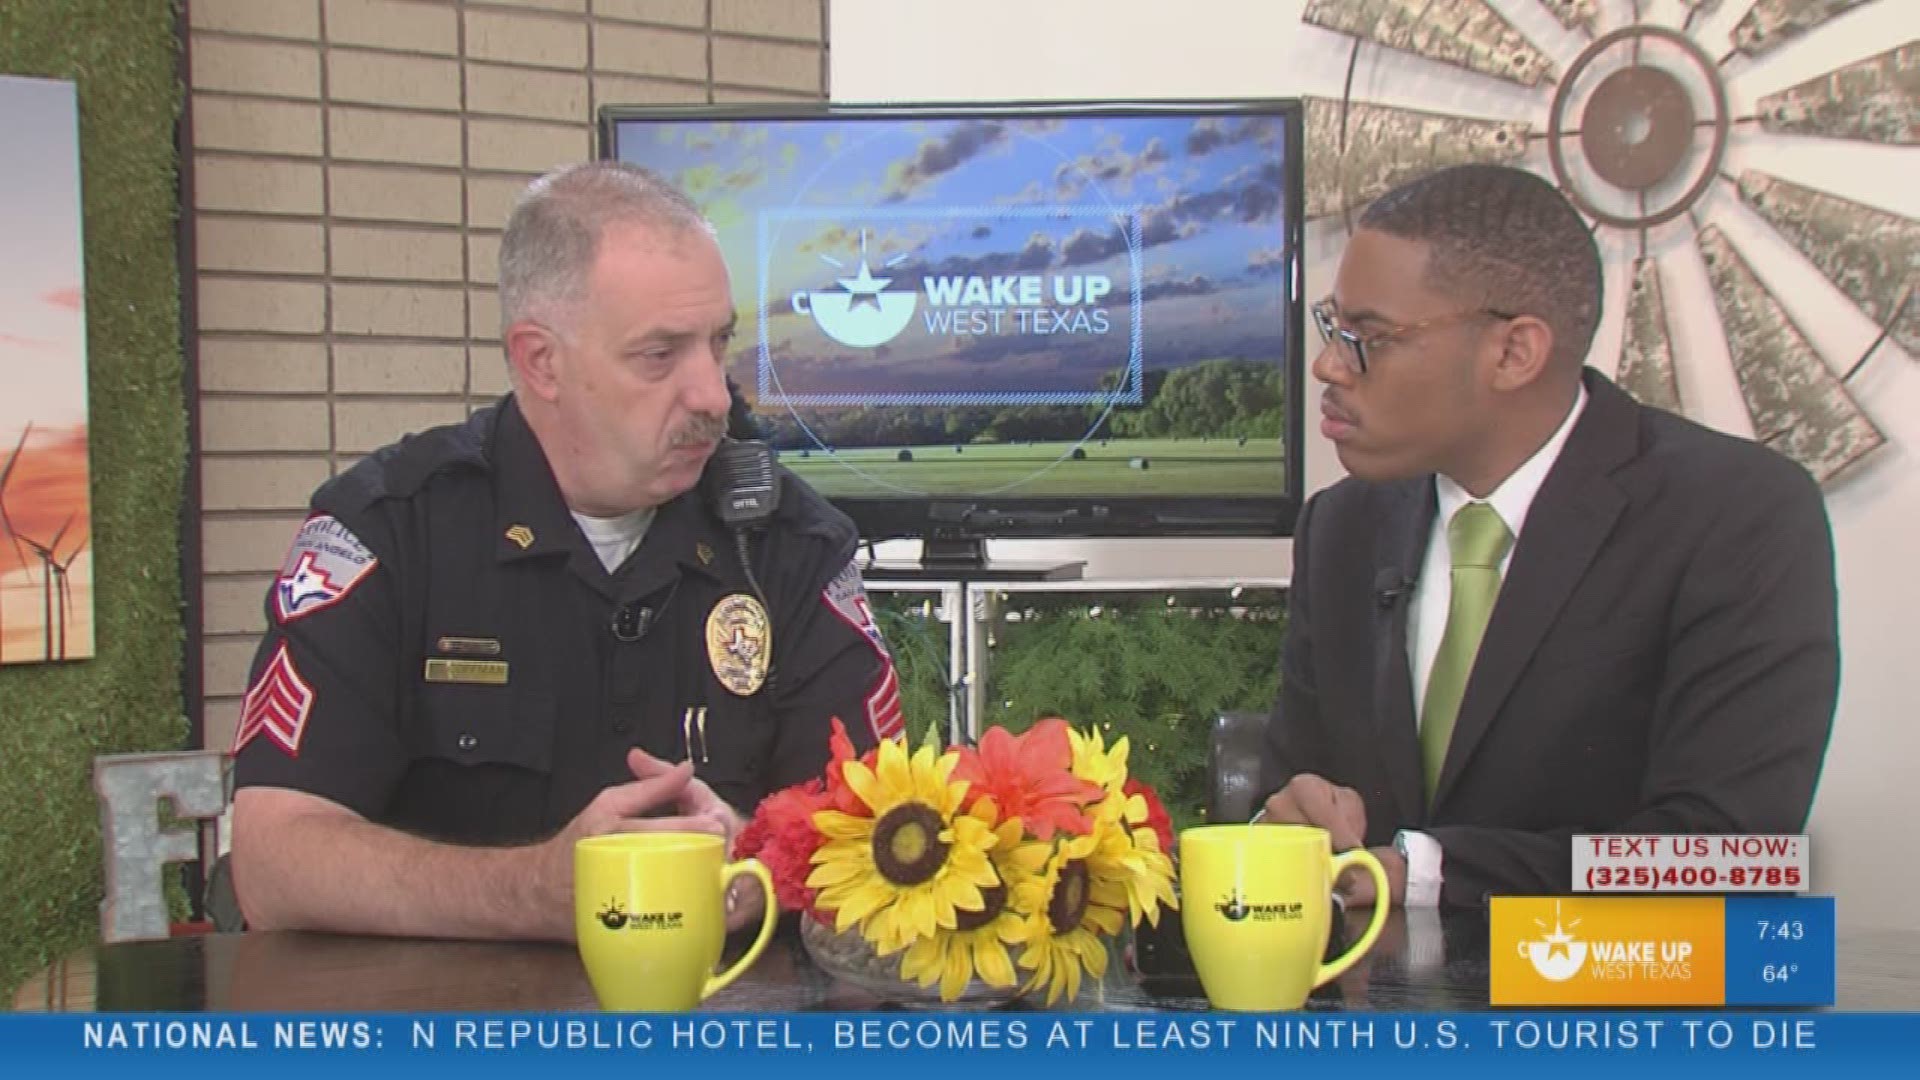 Our Malik Mingo spoke with Sgt. Tim Coffman with the San Angelo Police Department about the house watch program as well as some other tips to keep your house safe during summer vacations.